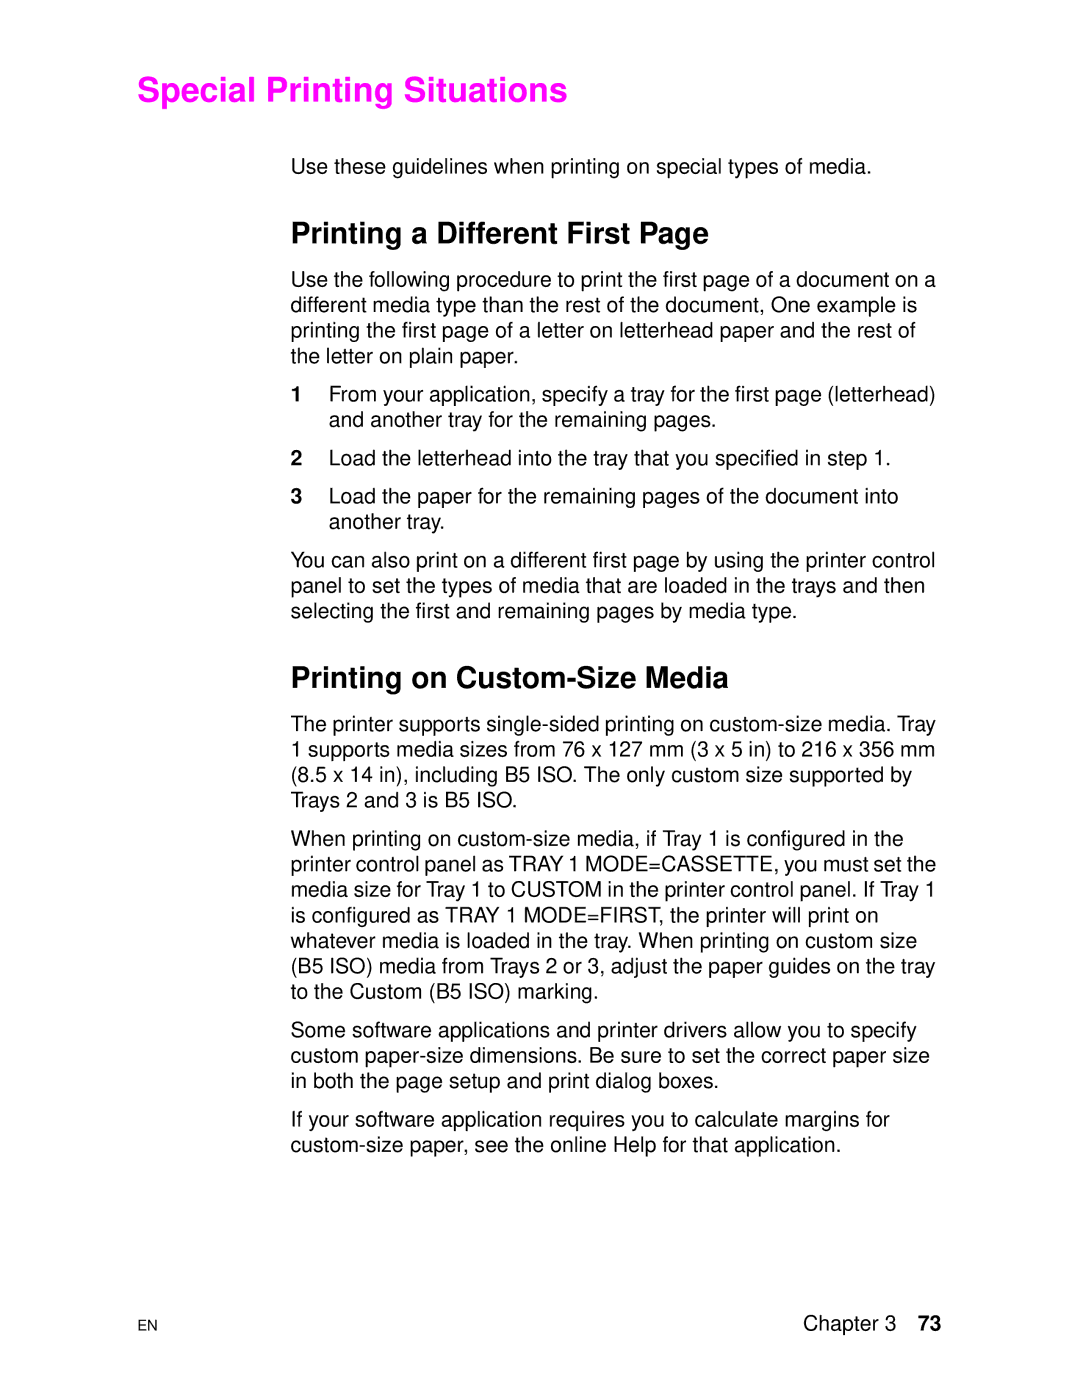 HP 4500DN manual Special Printing Situations, Printing a Different First, Printing on Custom-Size Media 